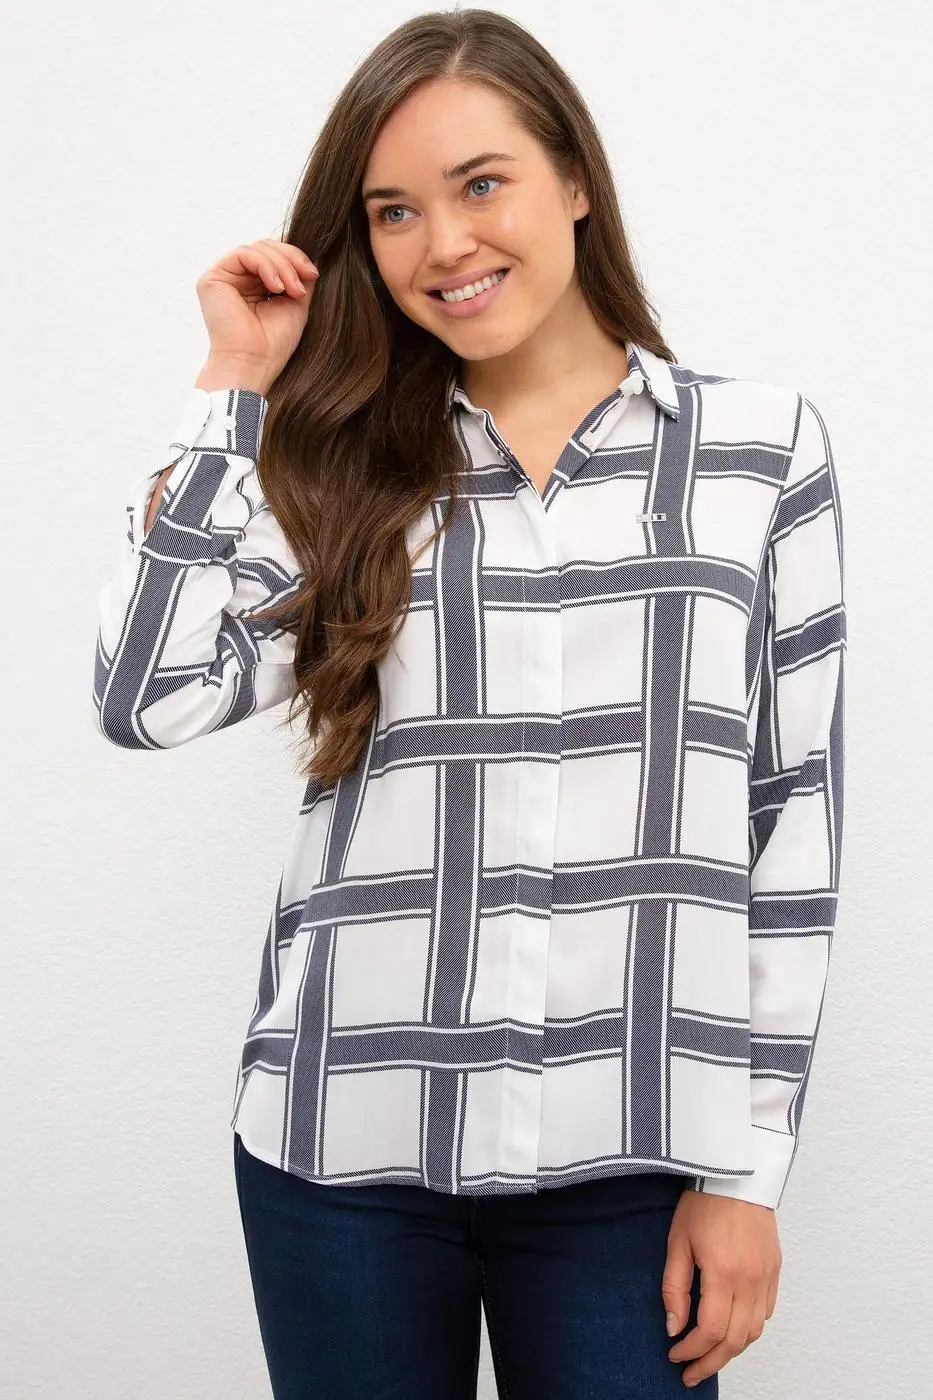 

Us. Polo Assn. Casual Long Sleeve Comfort fit Shirt Women Viscose Blouse Streetwear New Collection